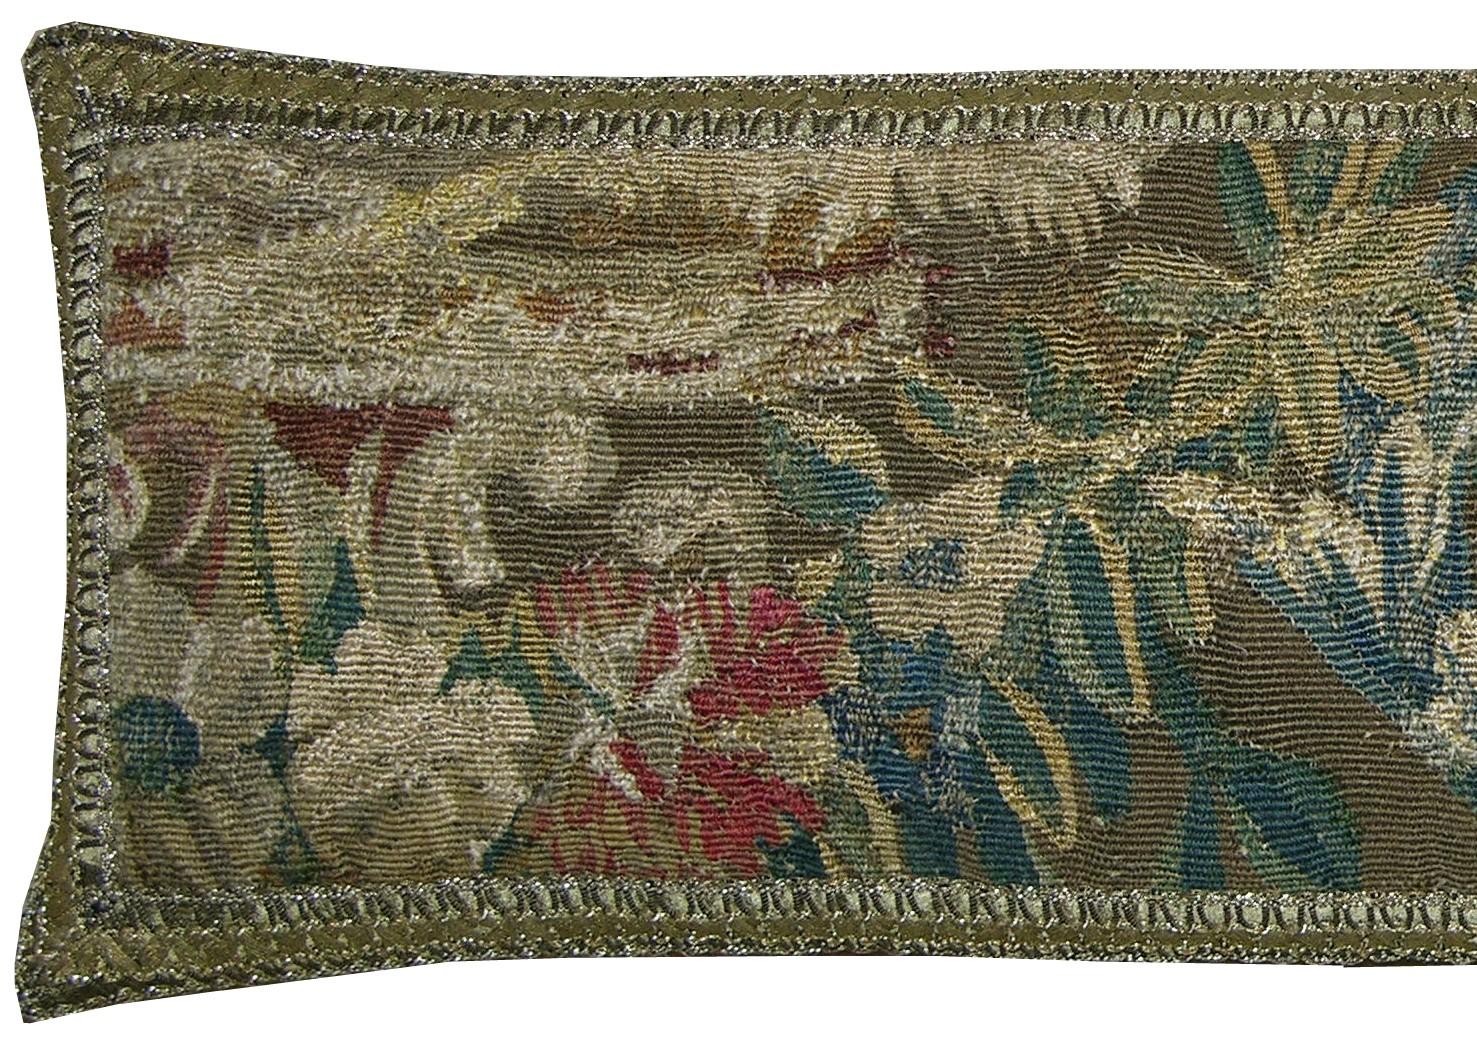 17th Century Antique Flemish Tapestry Pillow
